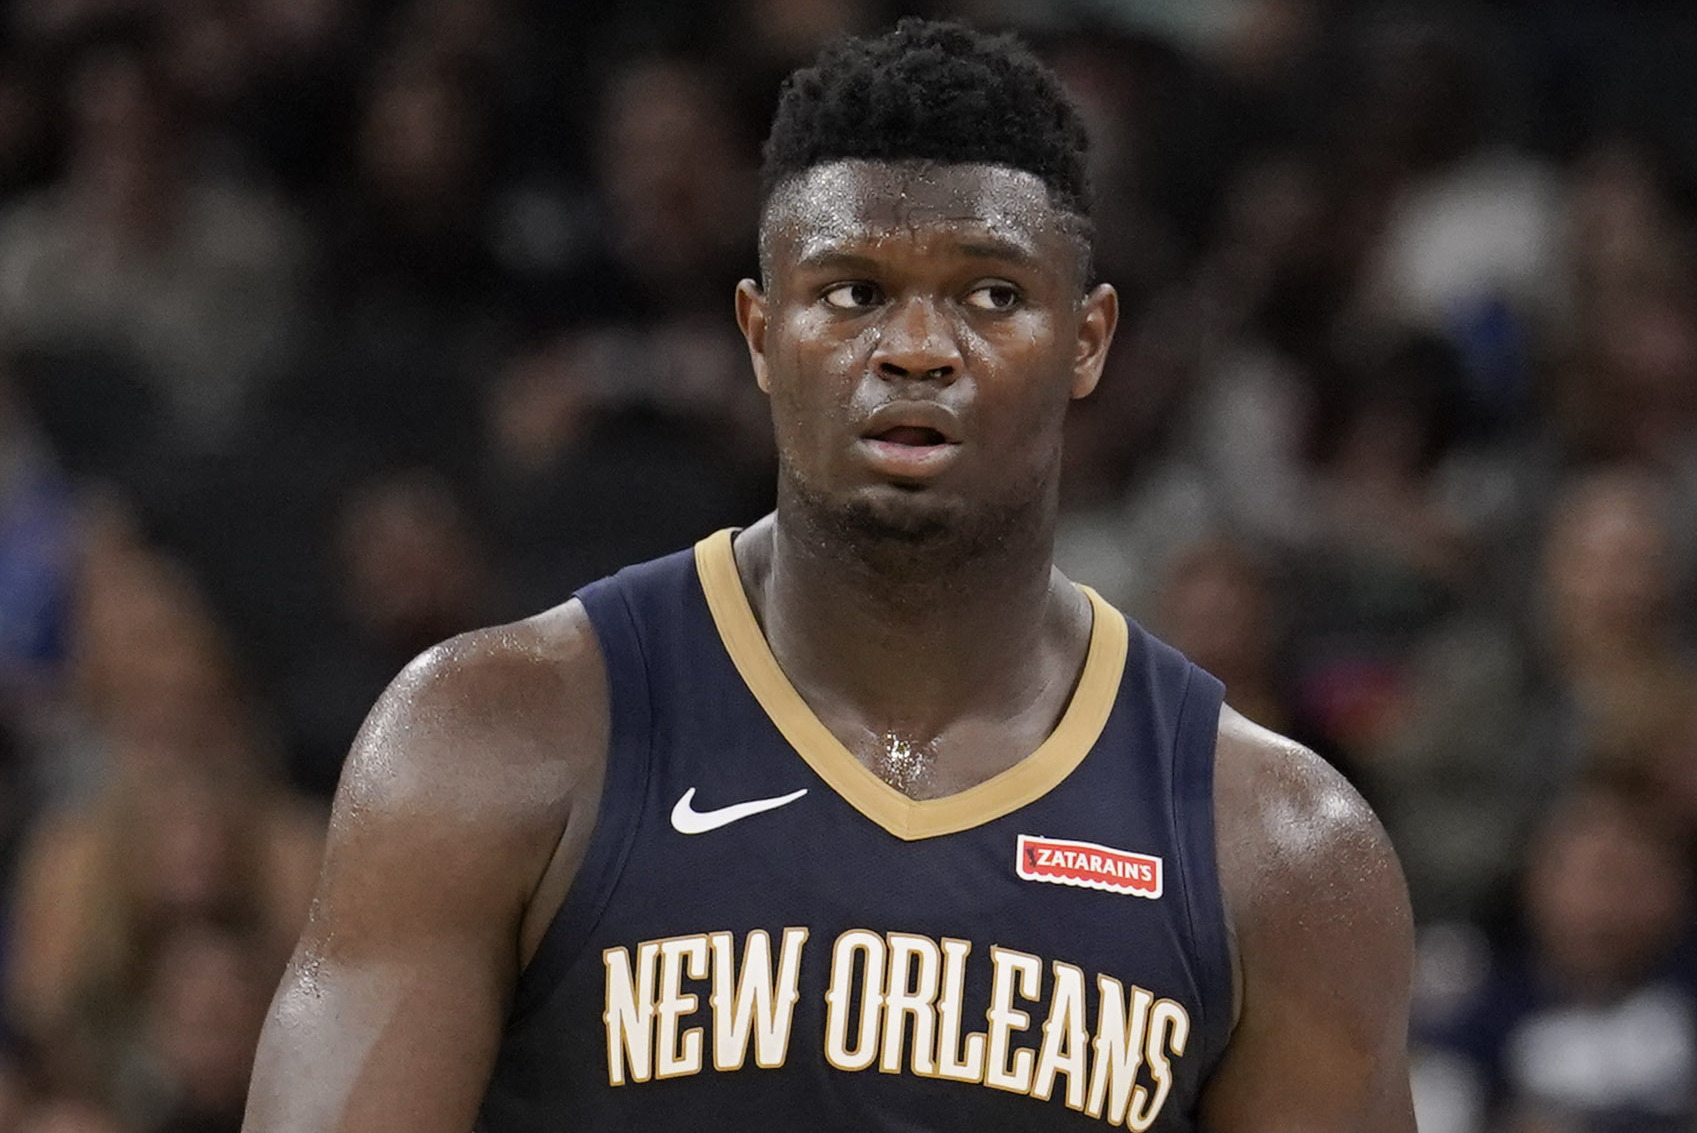 Pelicans Zion Williamson Expected To Make Nba Debut Jan 22 After Knee Injury Bleacher Report Latest News Videos And Highlights